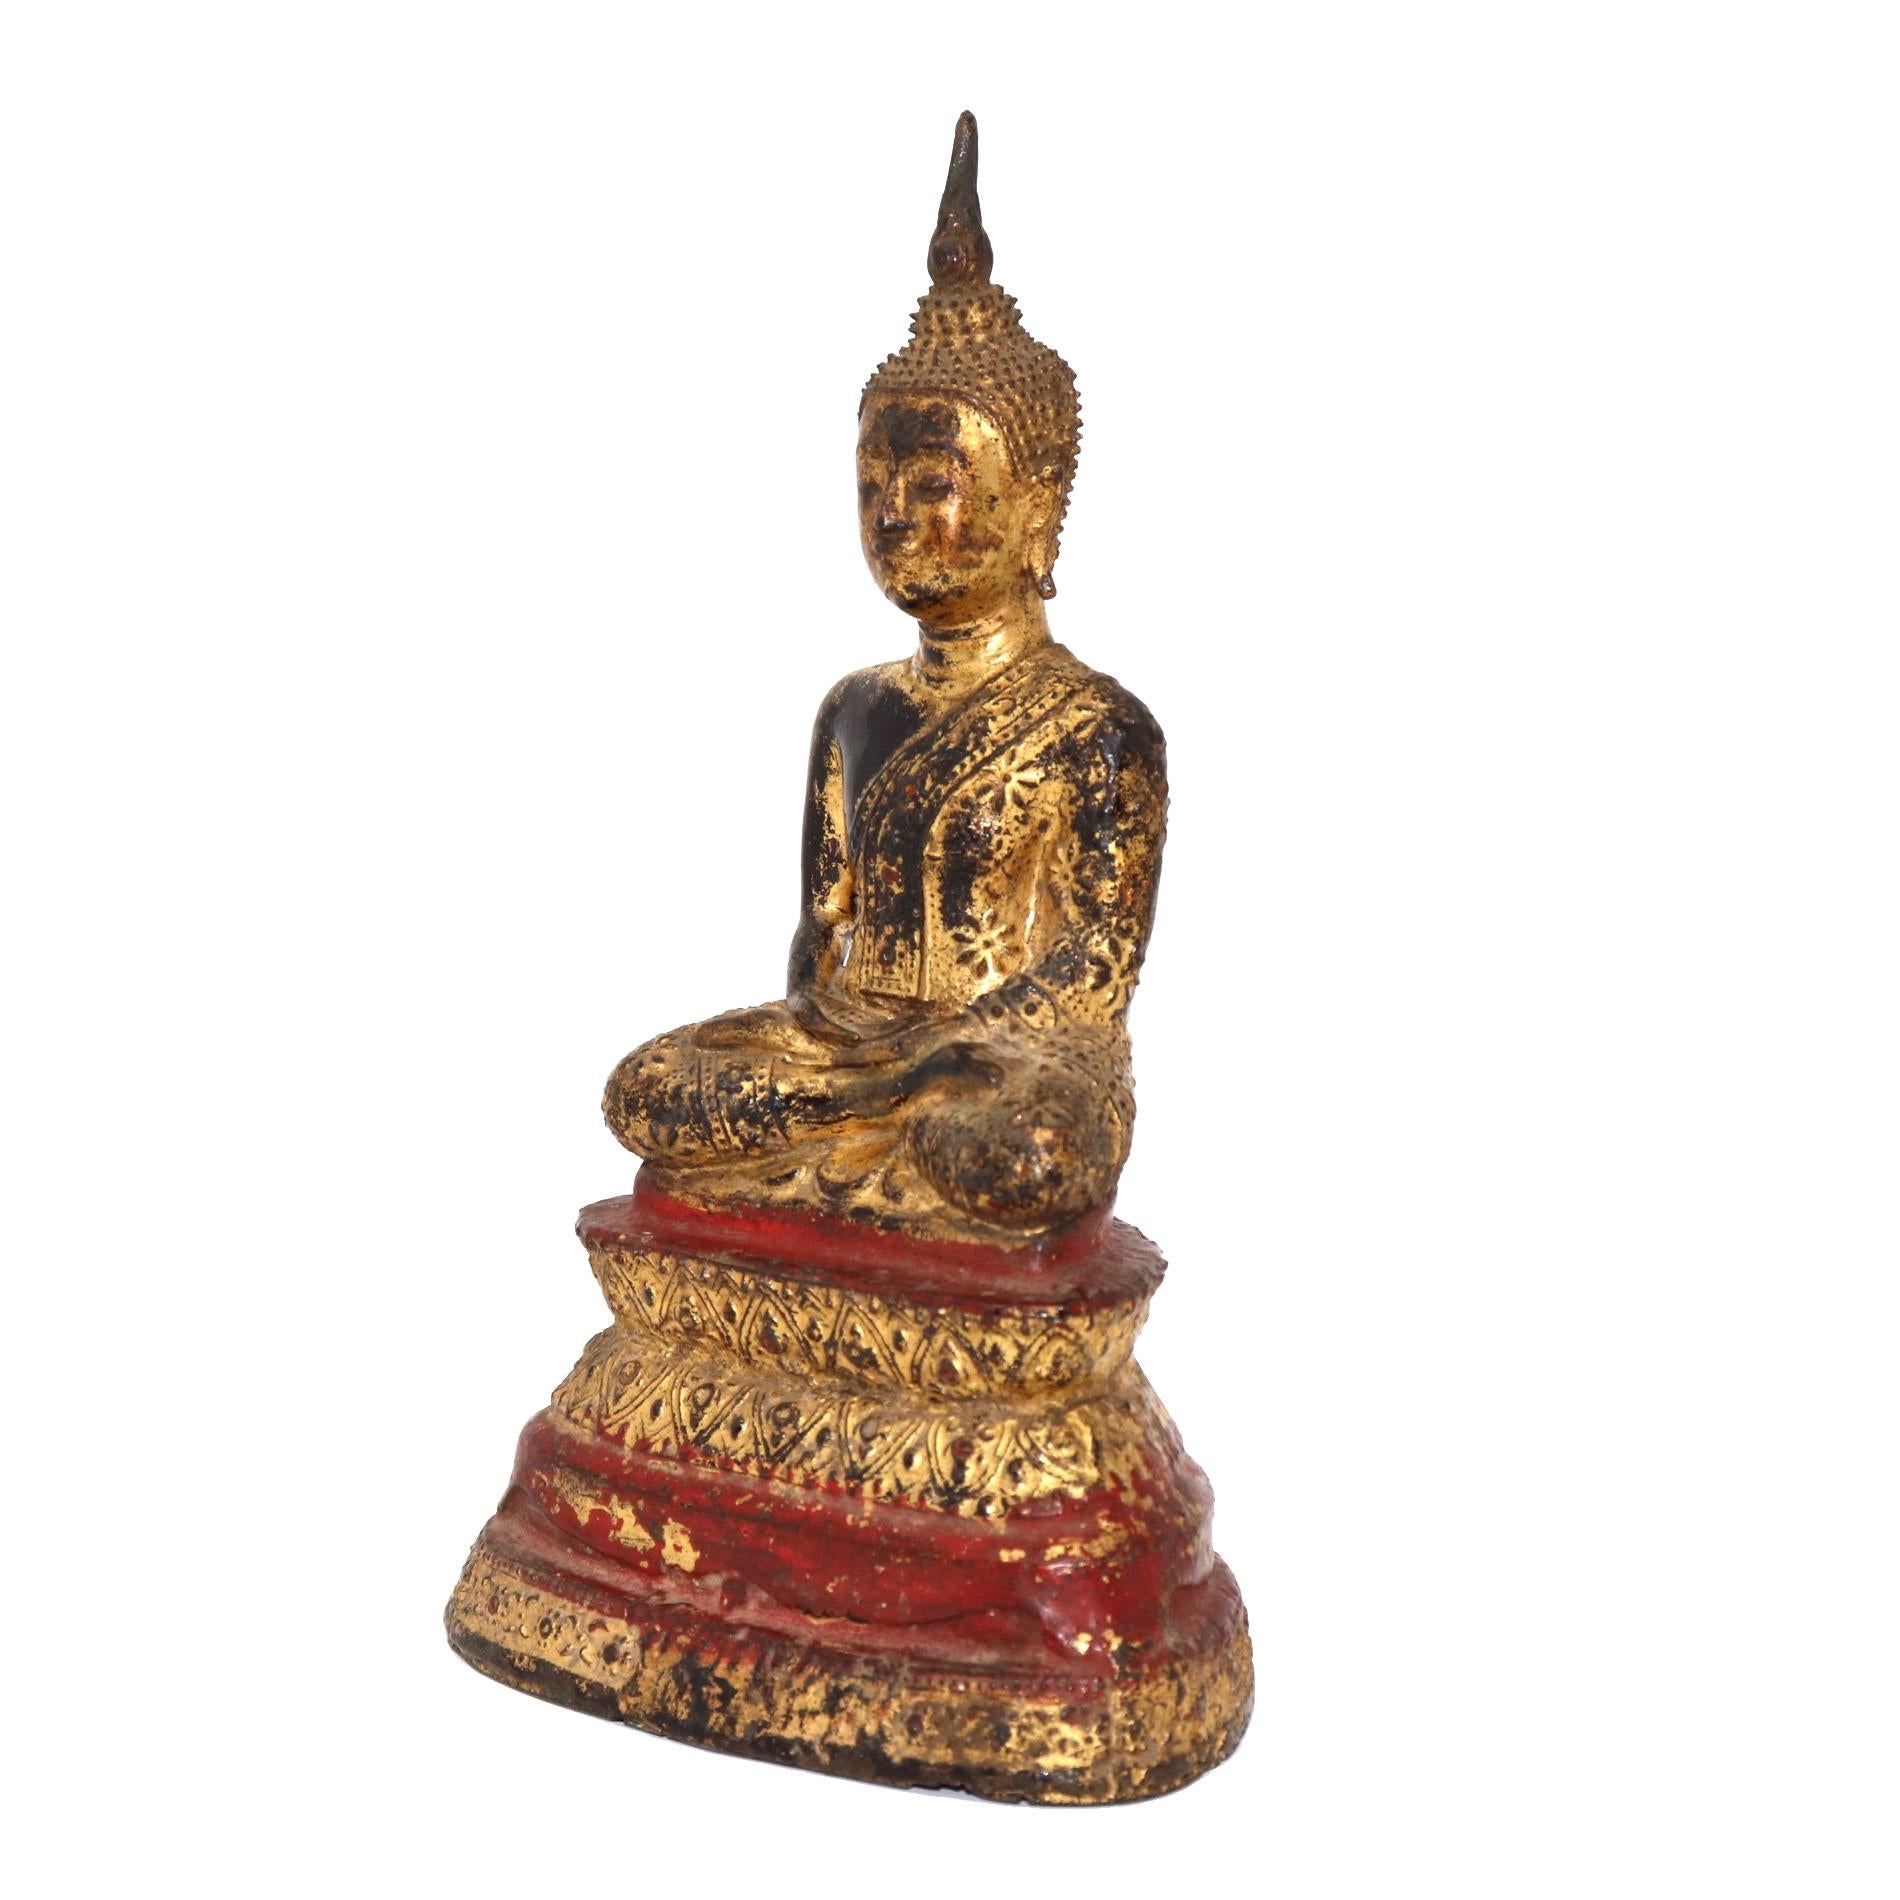 Thai gilt bronze figure of a seated Buddha, depicted with legs crossed in the vajrasana position with the feet resting on the thighs soles up, believed to be the position the Buddha was in when he achieved enlightenment hands overlapping palms up